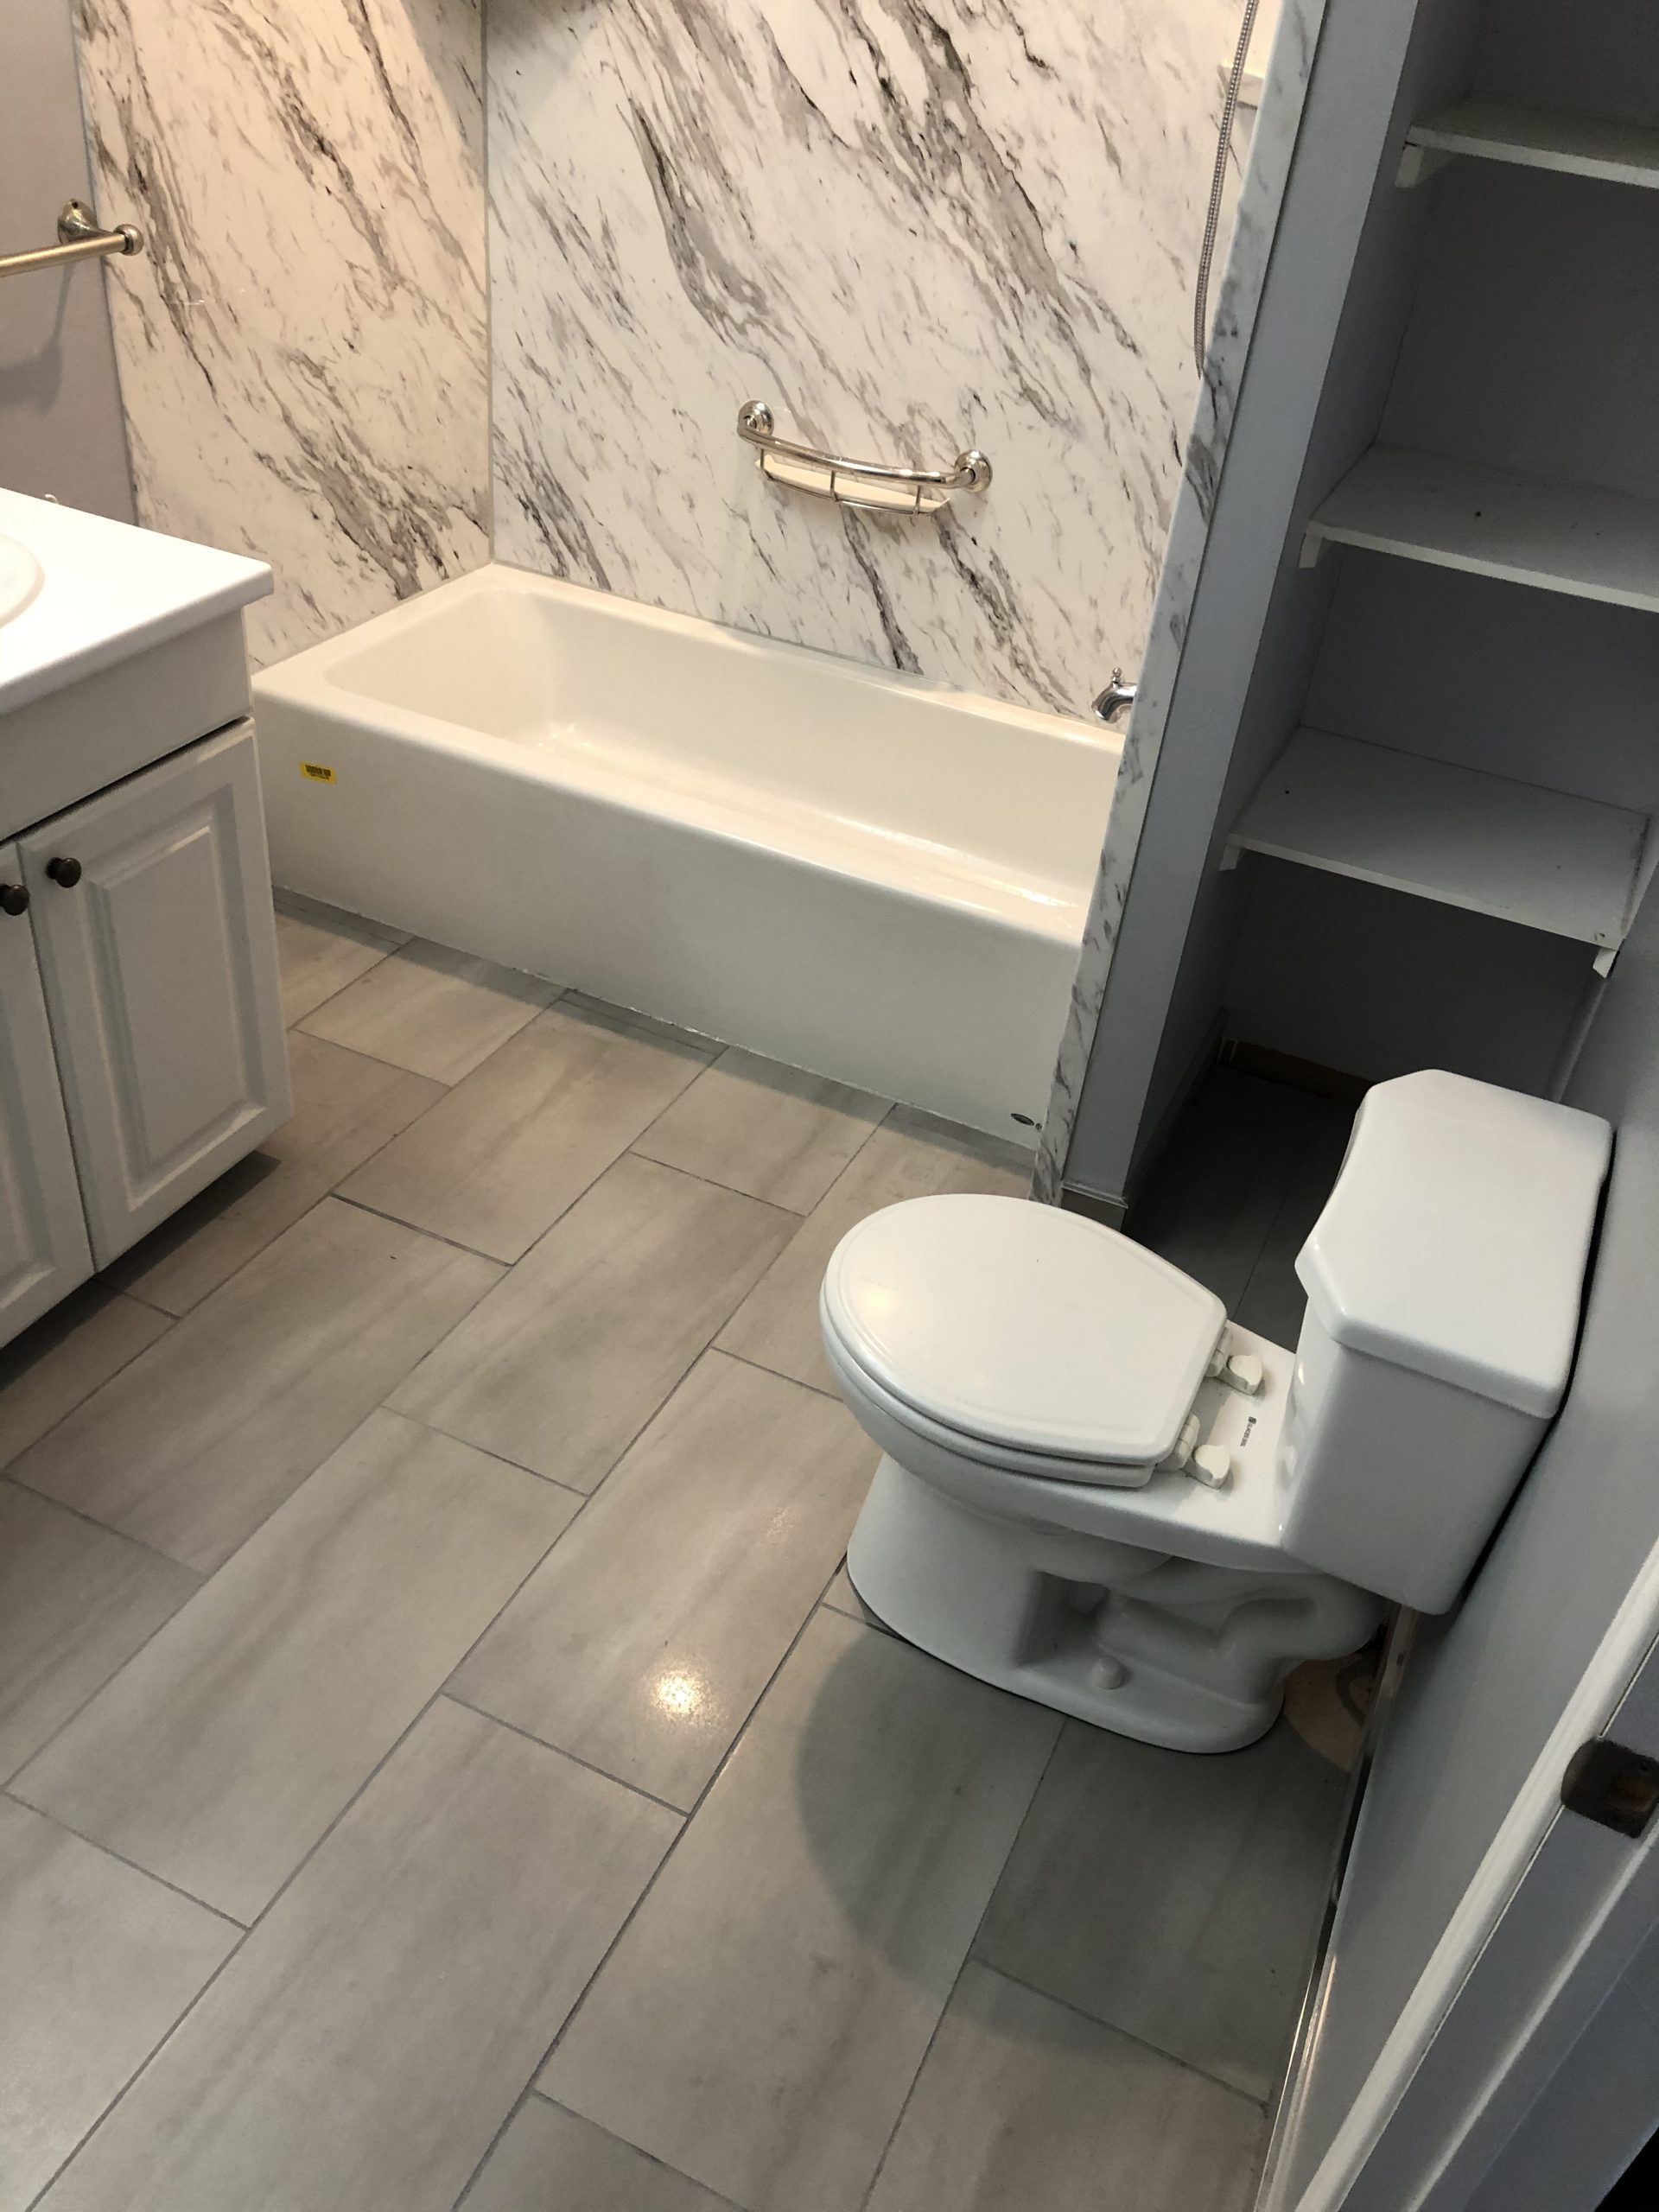 photo of newly renovated bathtub, toilet and floor